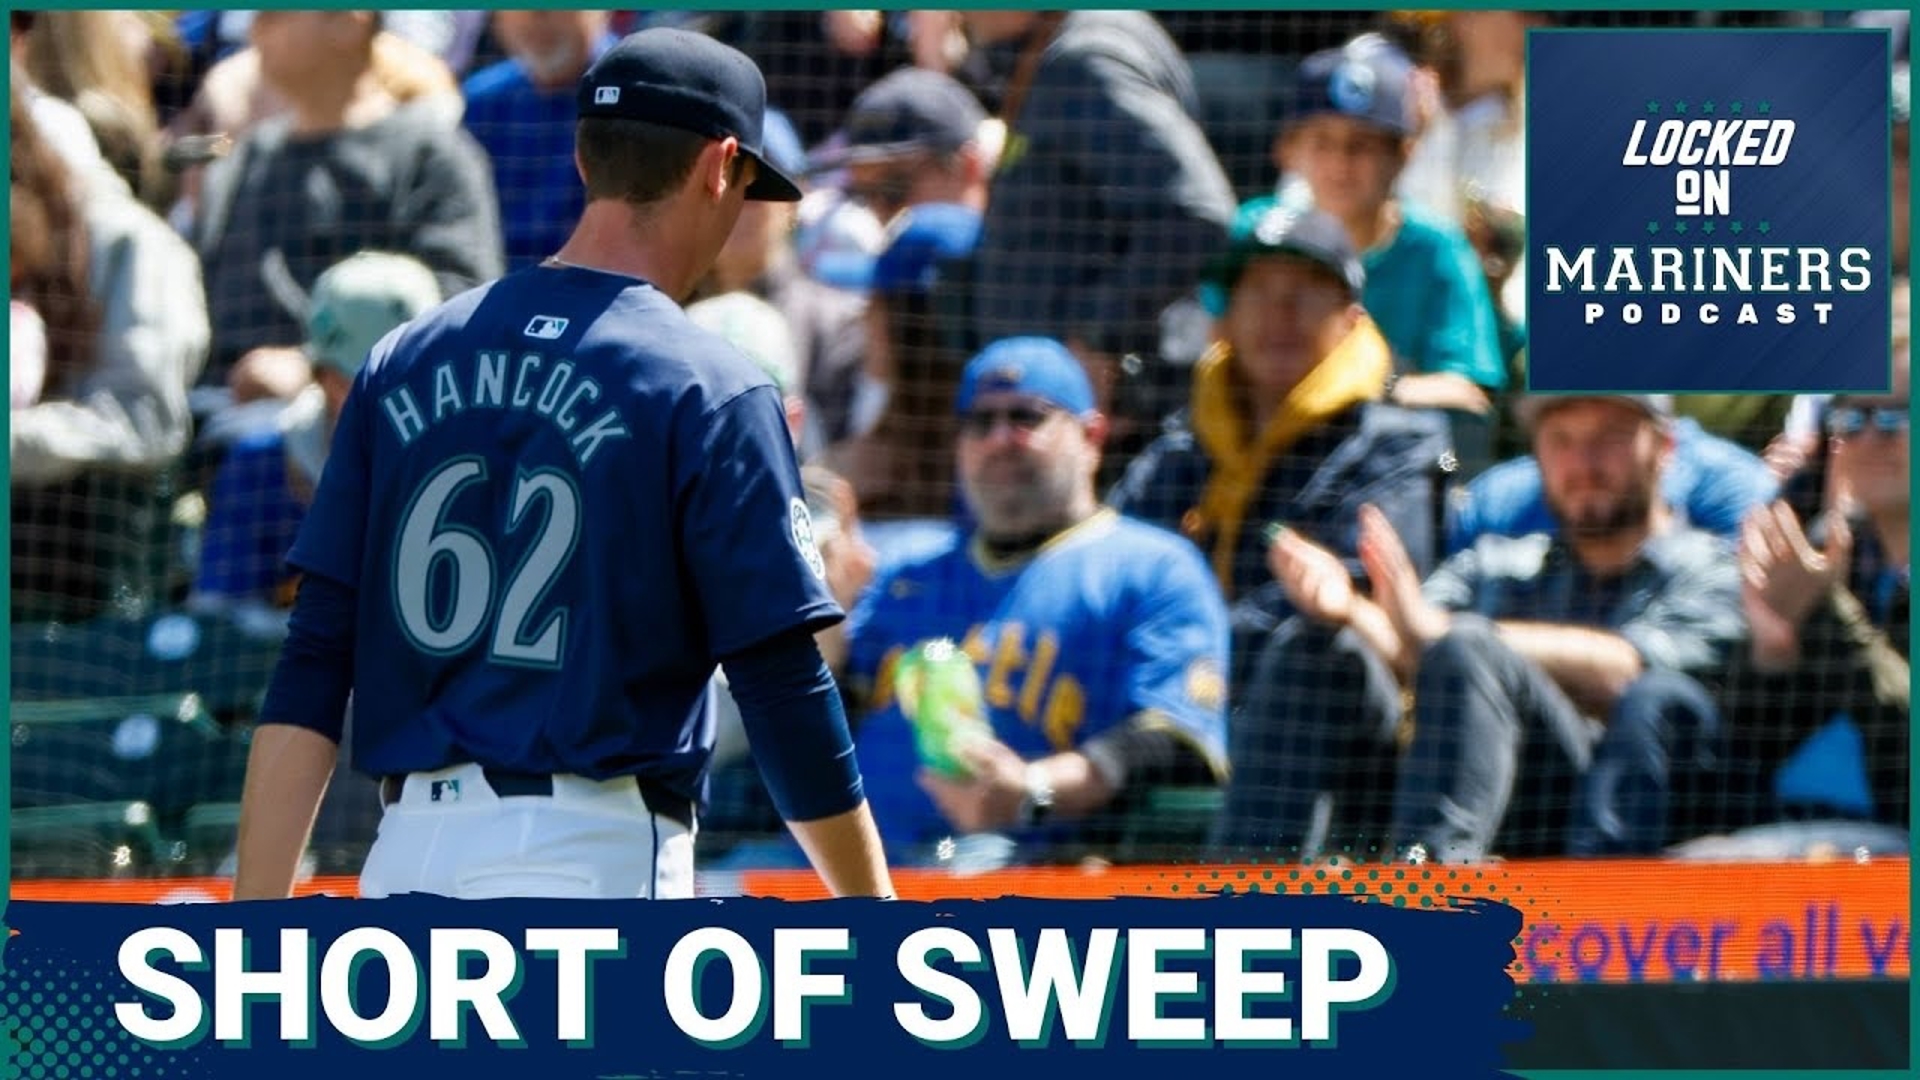 Fresh off securing their fifth consecutive series victory, the Mariners fell short of sweeping the Braves on Wednesday.